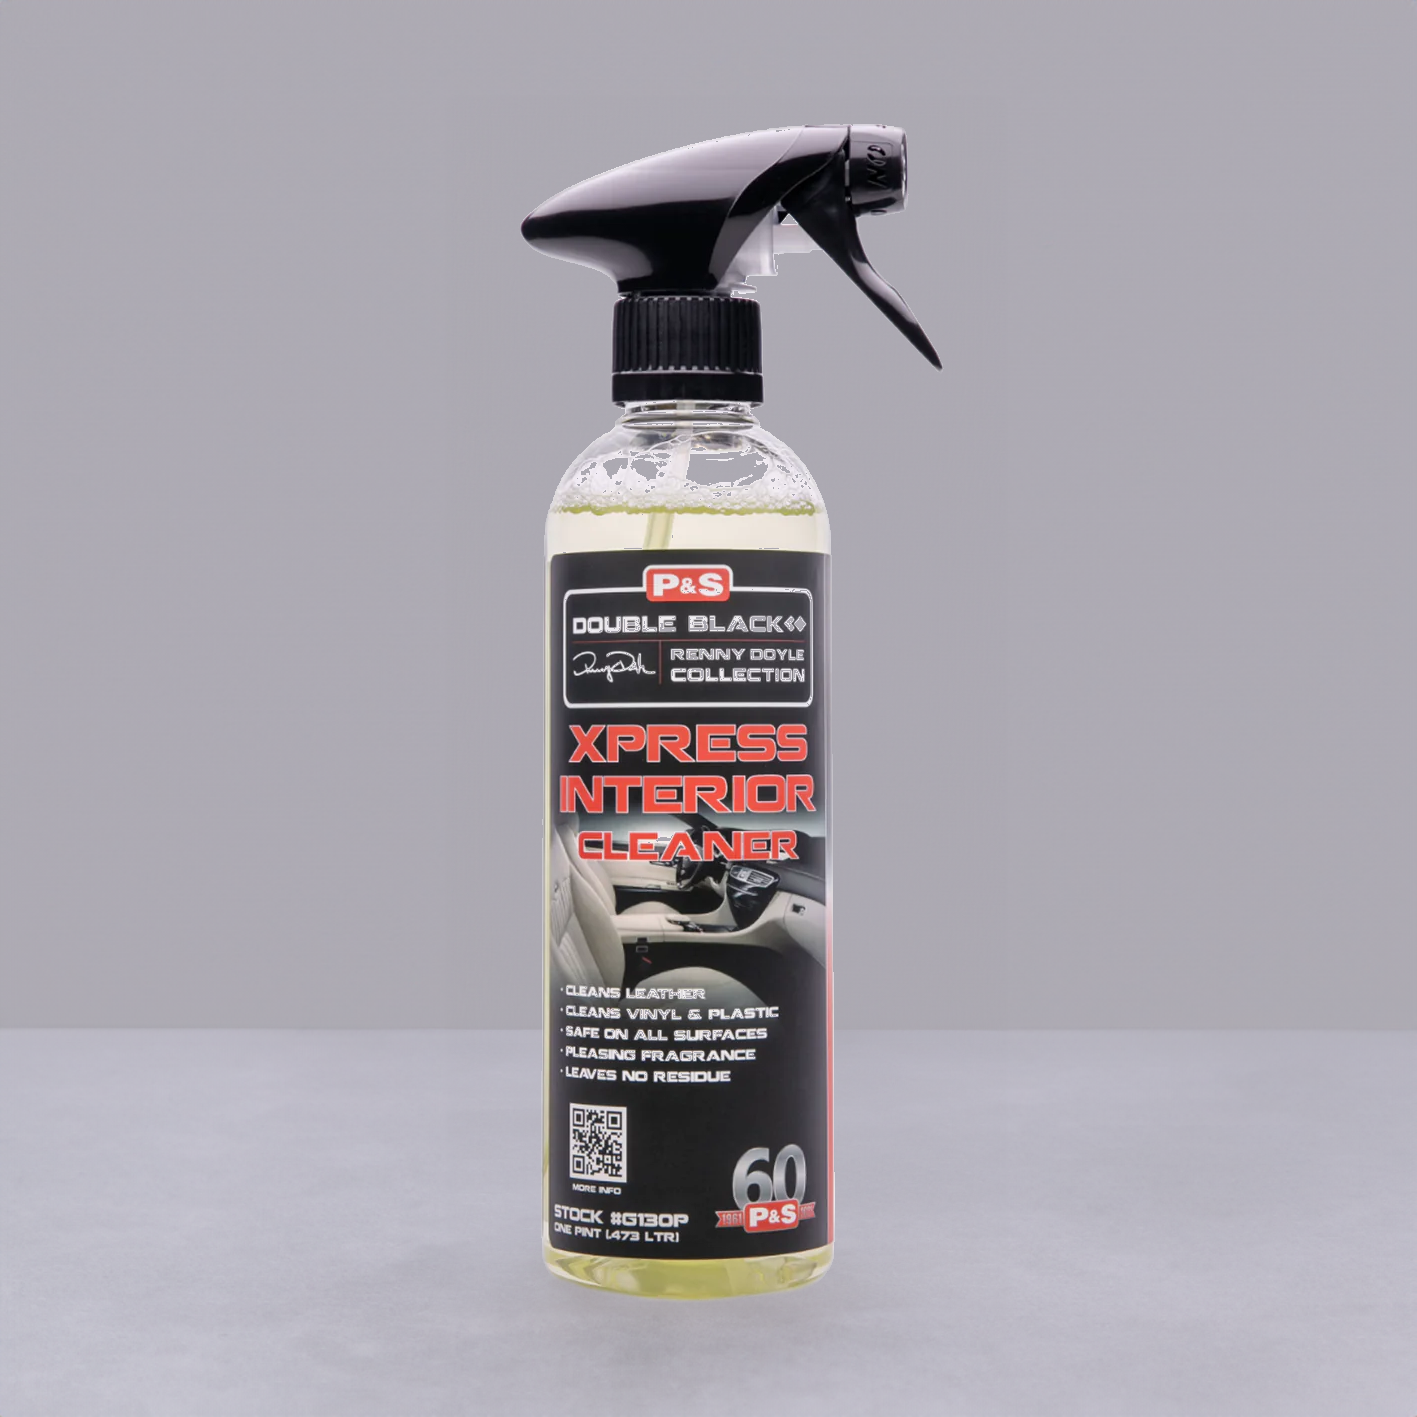 P&S Detailing Products Xpress Interior Cleaner –